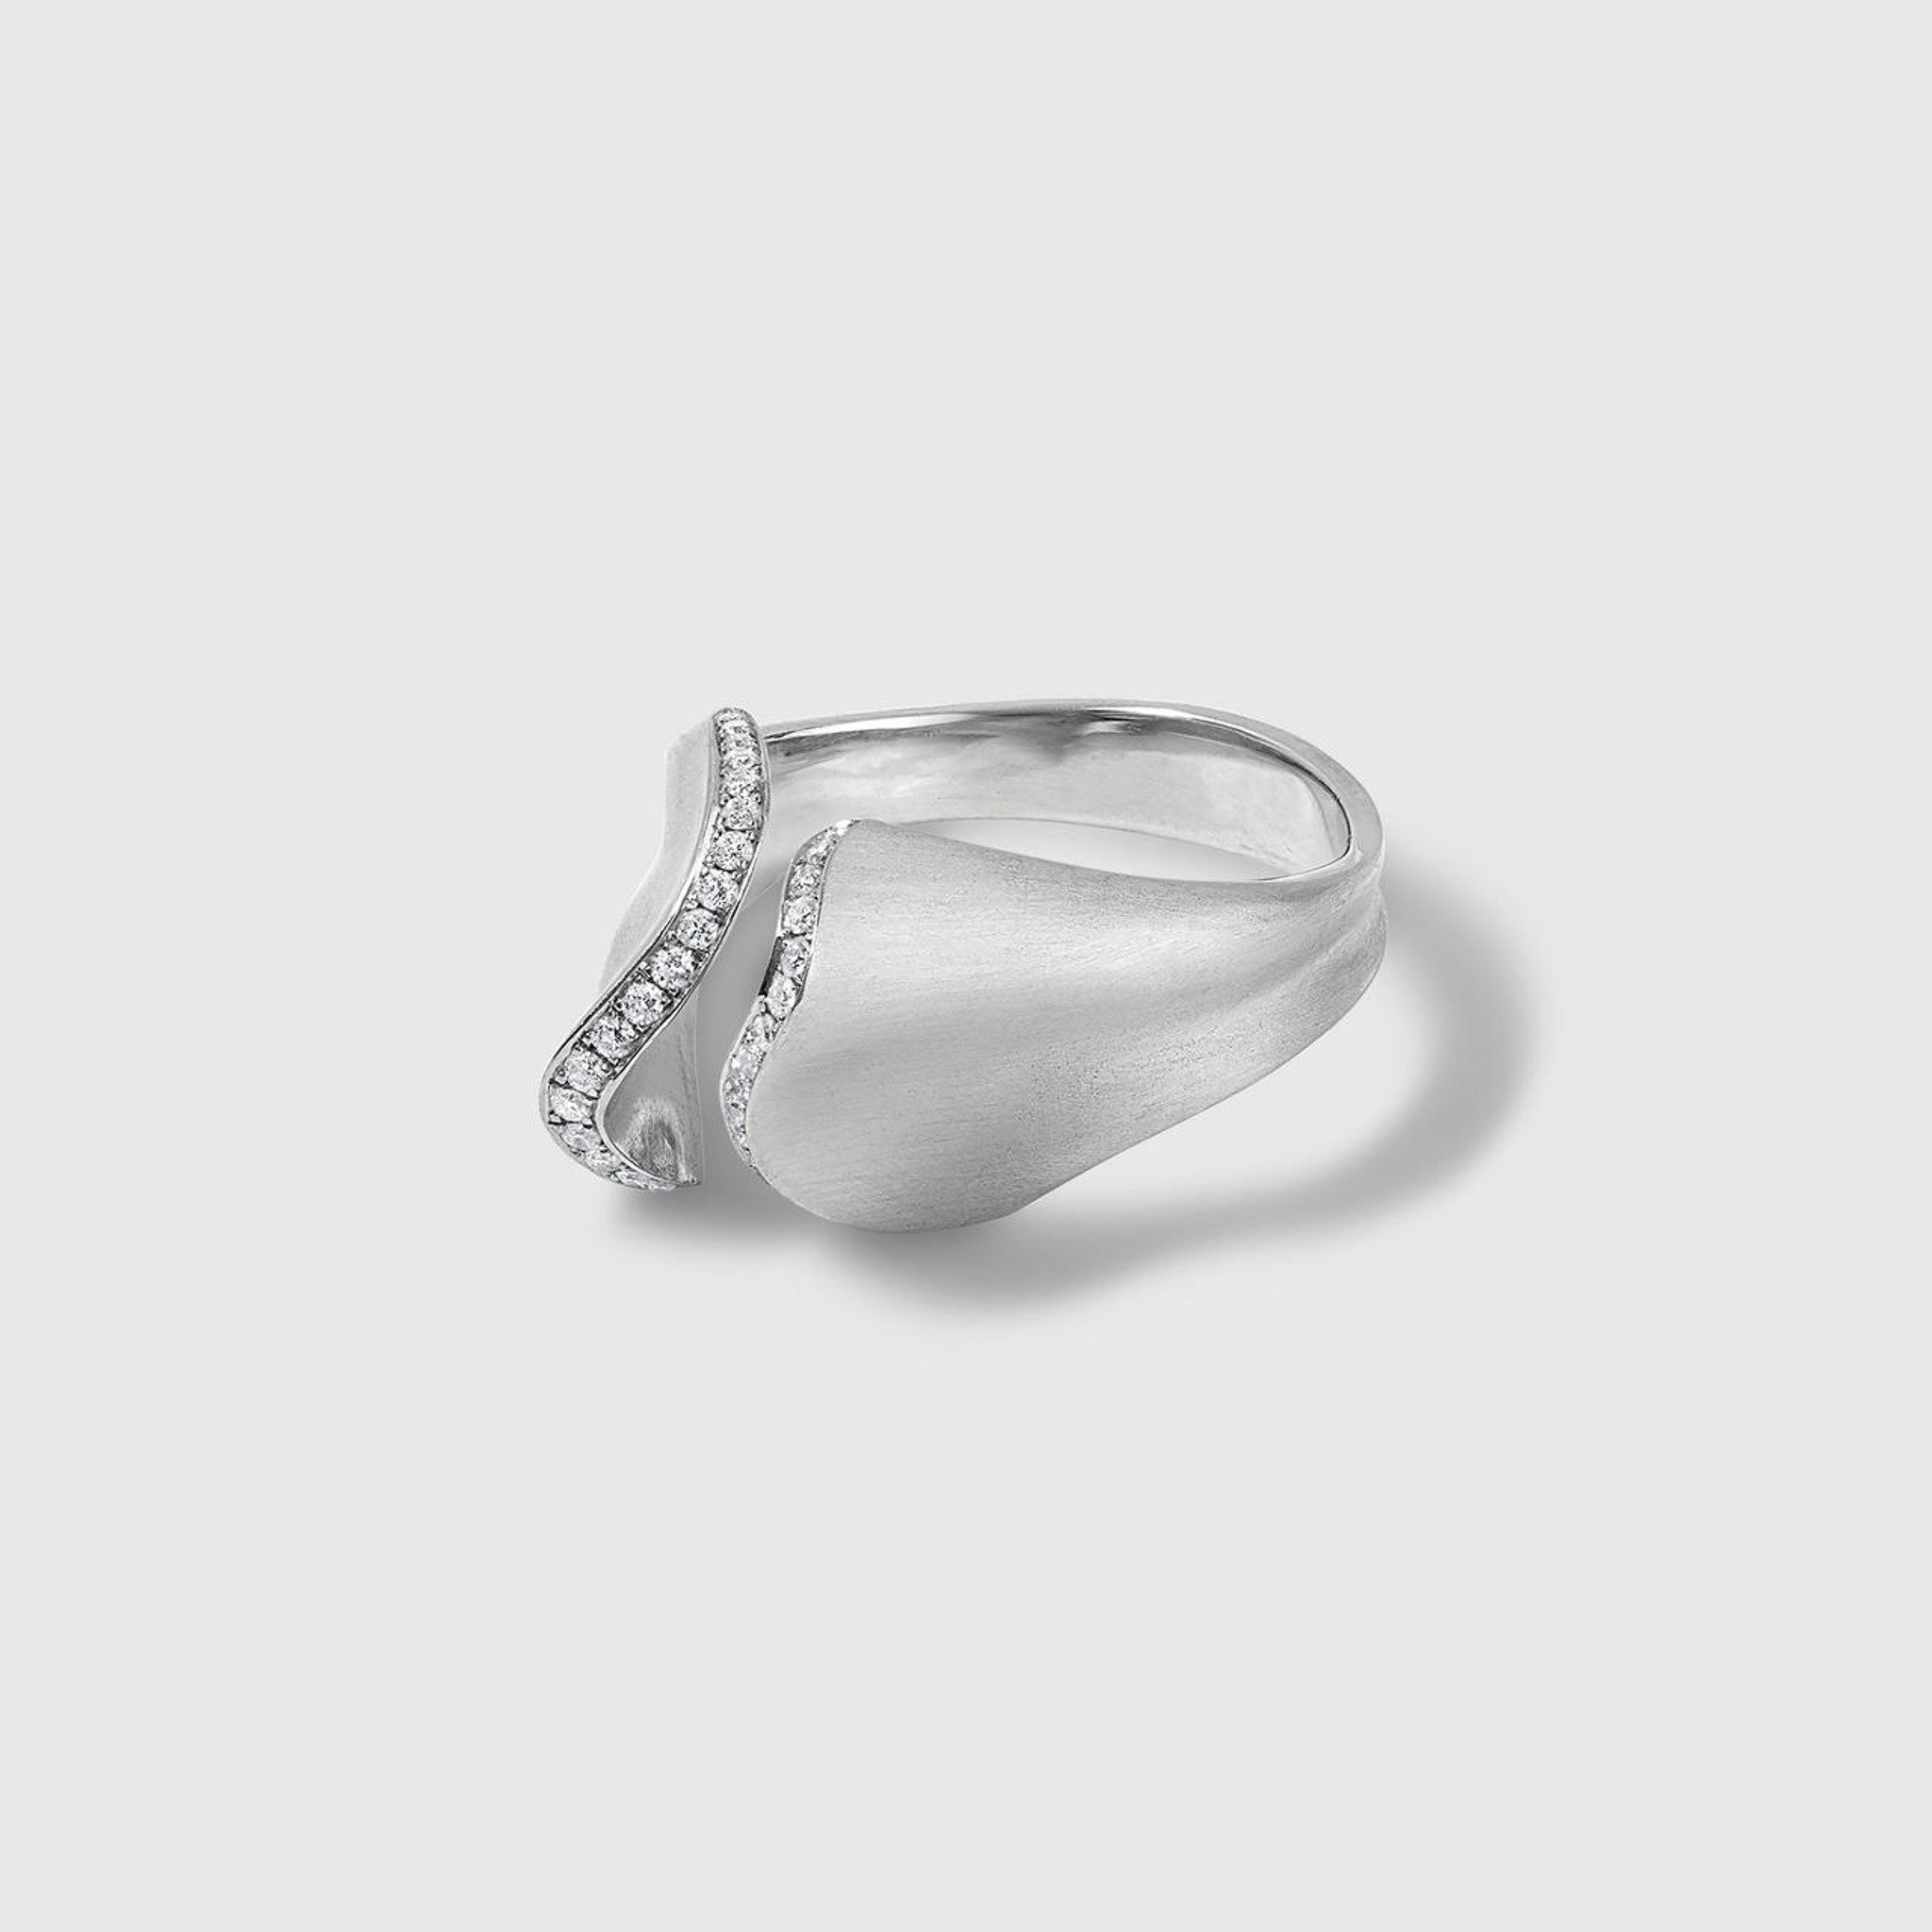 Ashley Childs Influence Ring in Platinum and Diamonds 